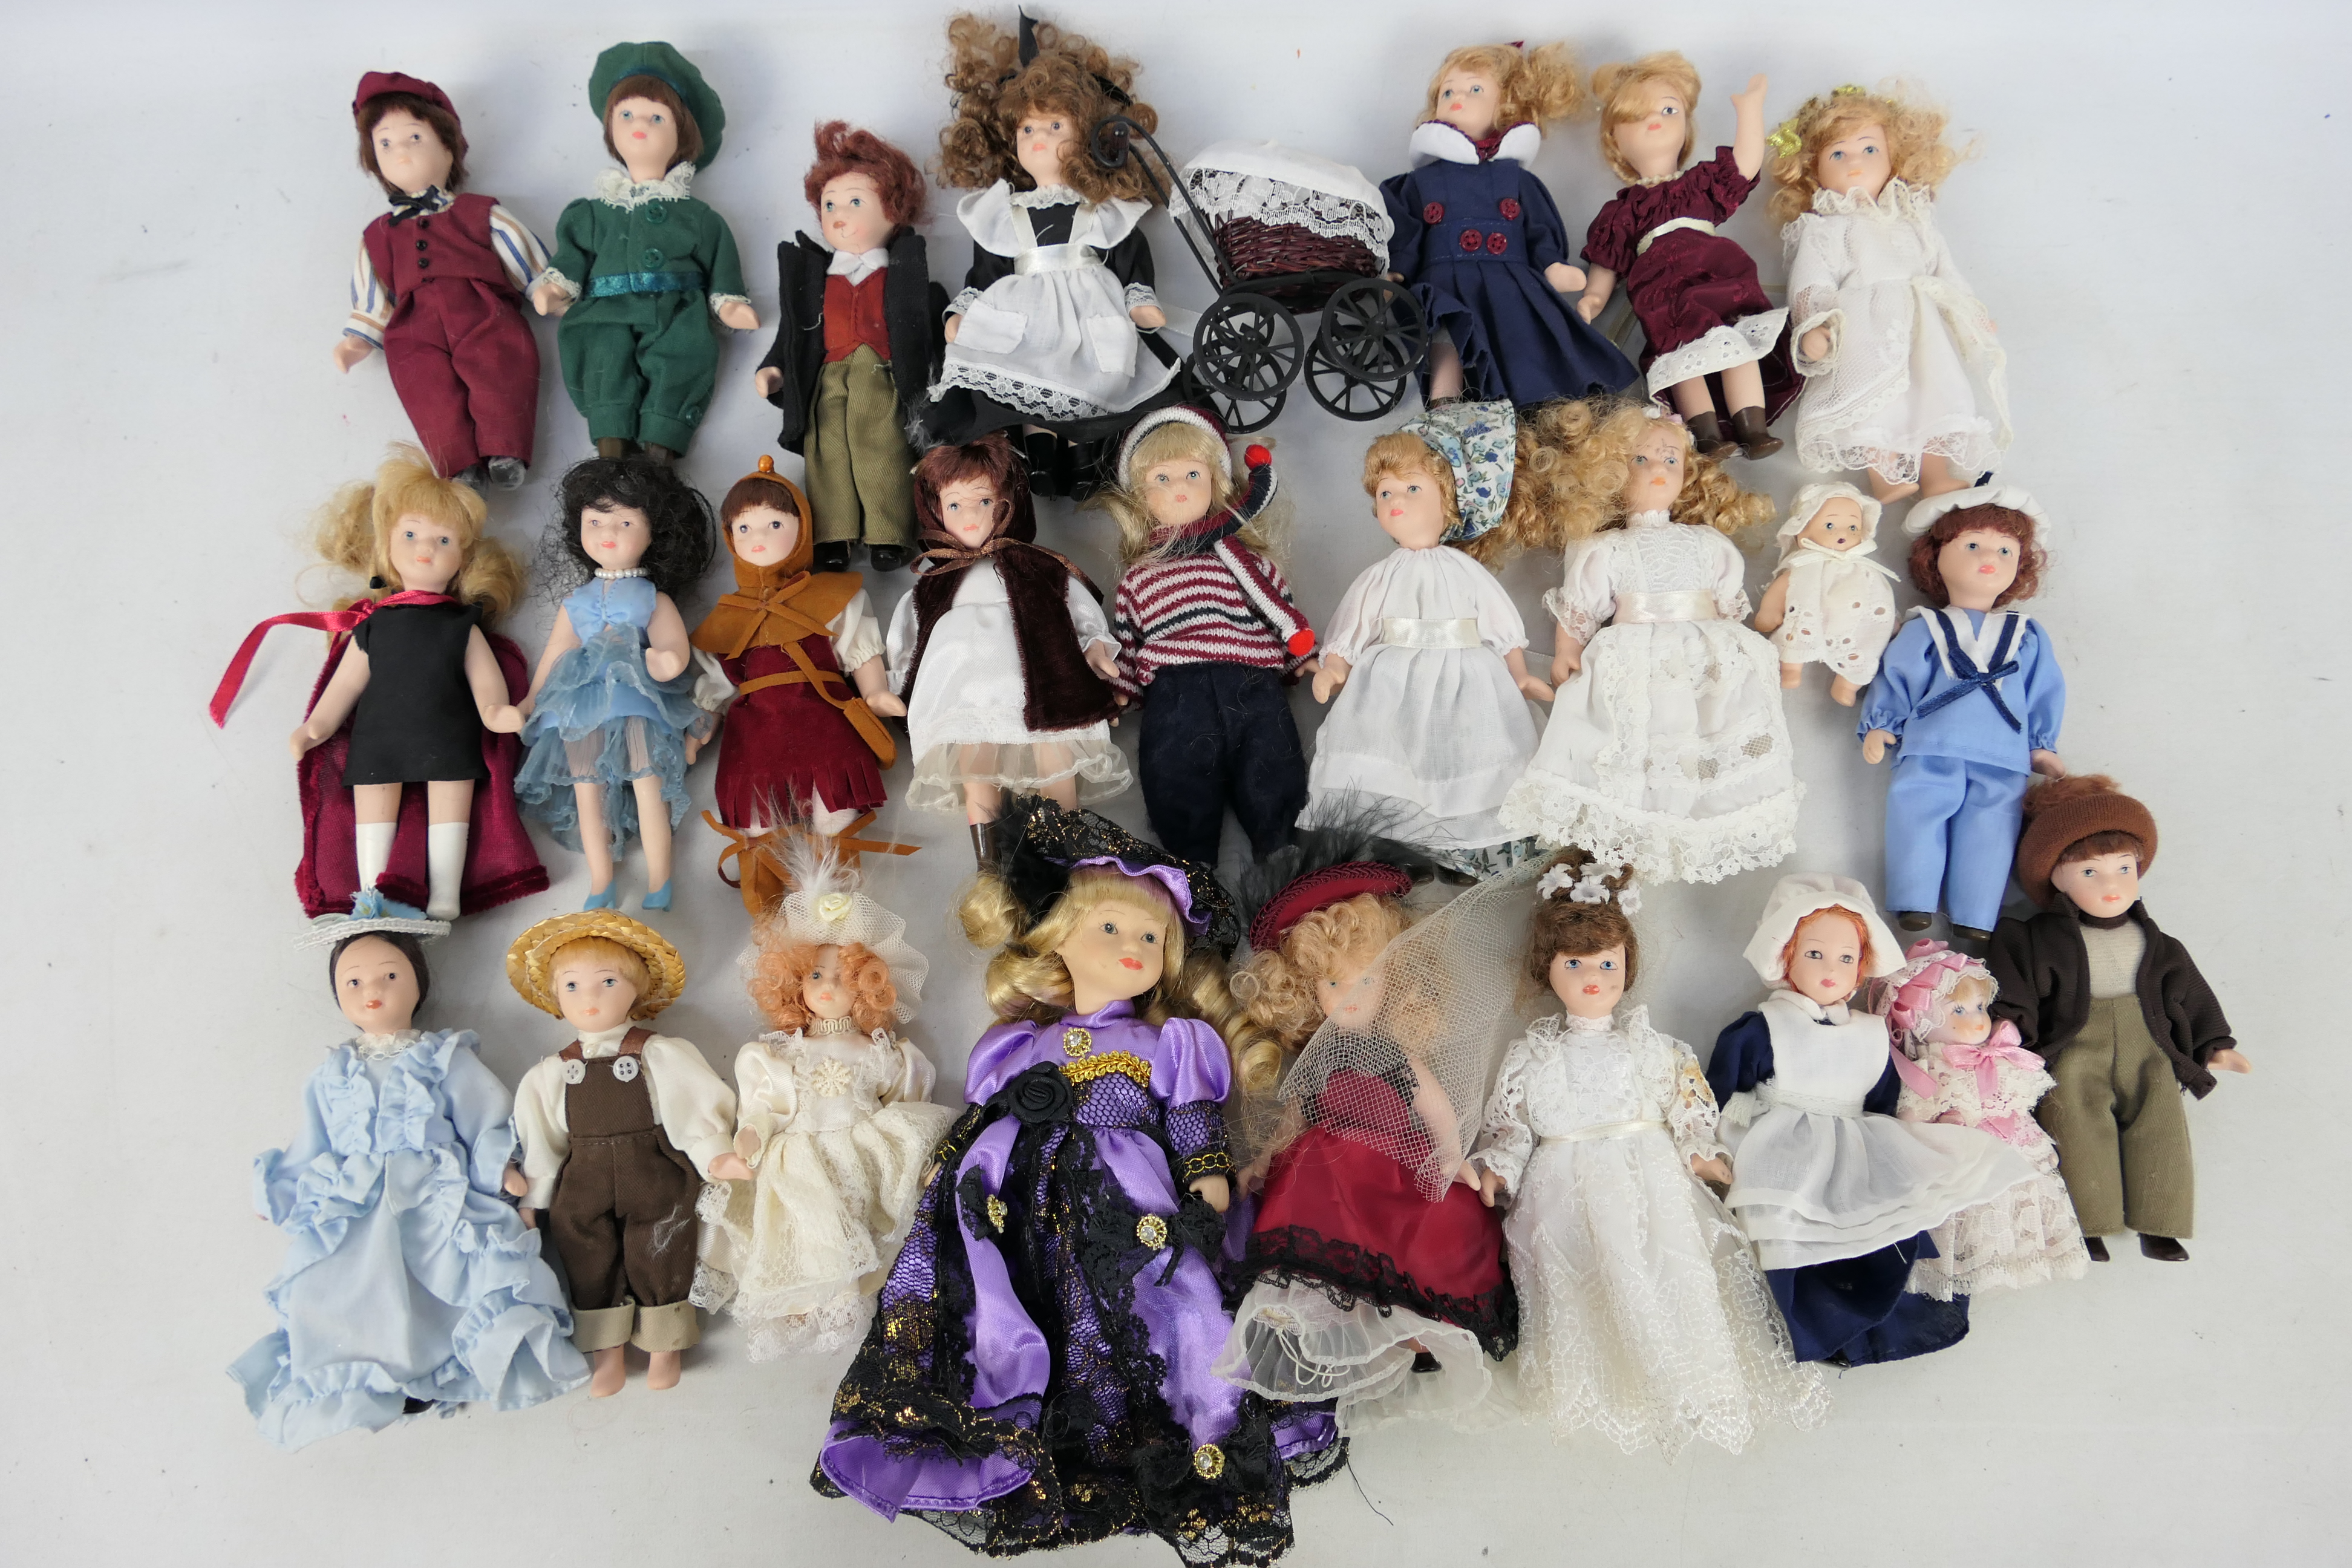 Deagostini - A collection of 25 miniature porcelain dolls attributed to Deagostini.